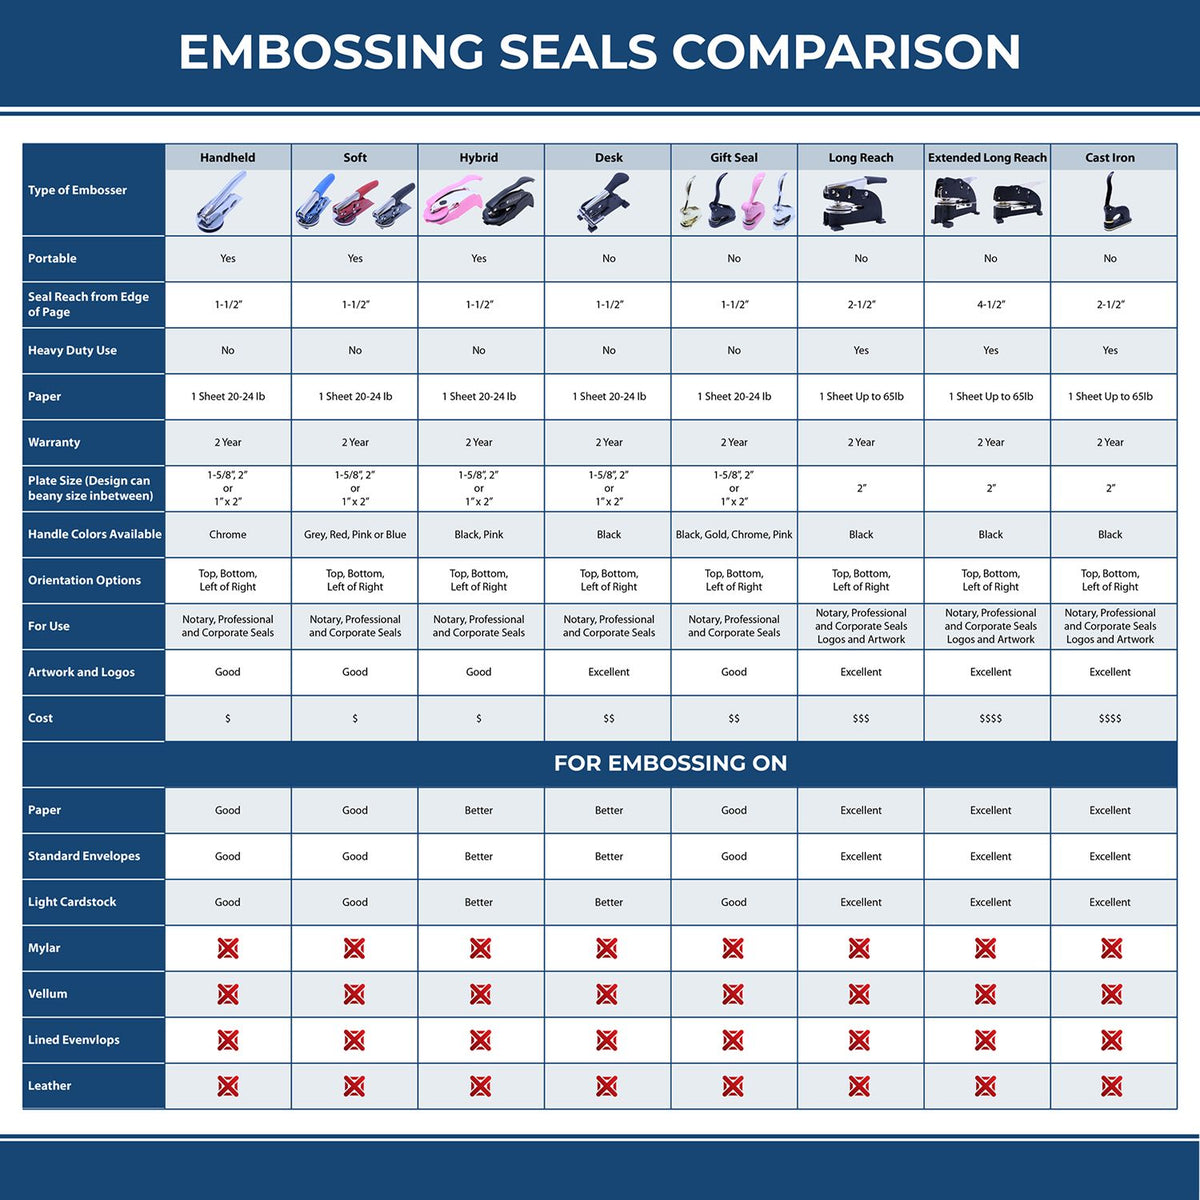 A comparison chart for the different types of mount models available for the Heavy Duty Cast Iron Nebraska Land Surveyor Seal Embosser.